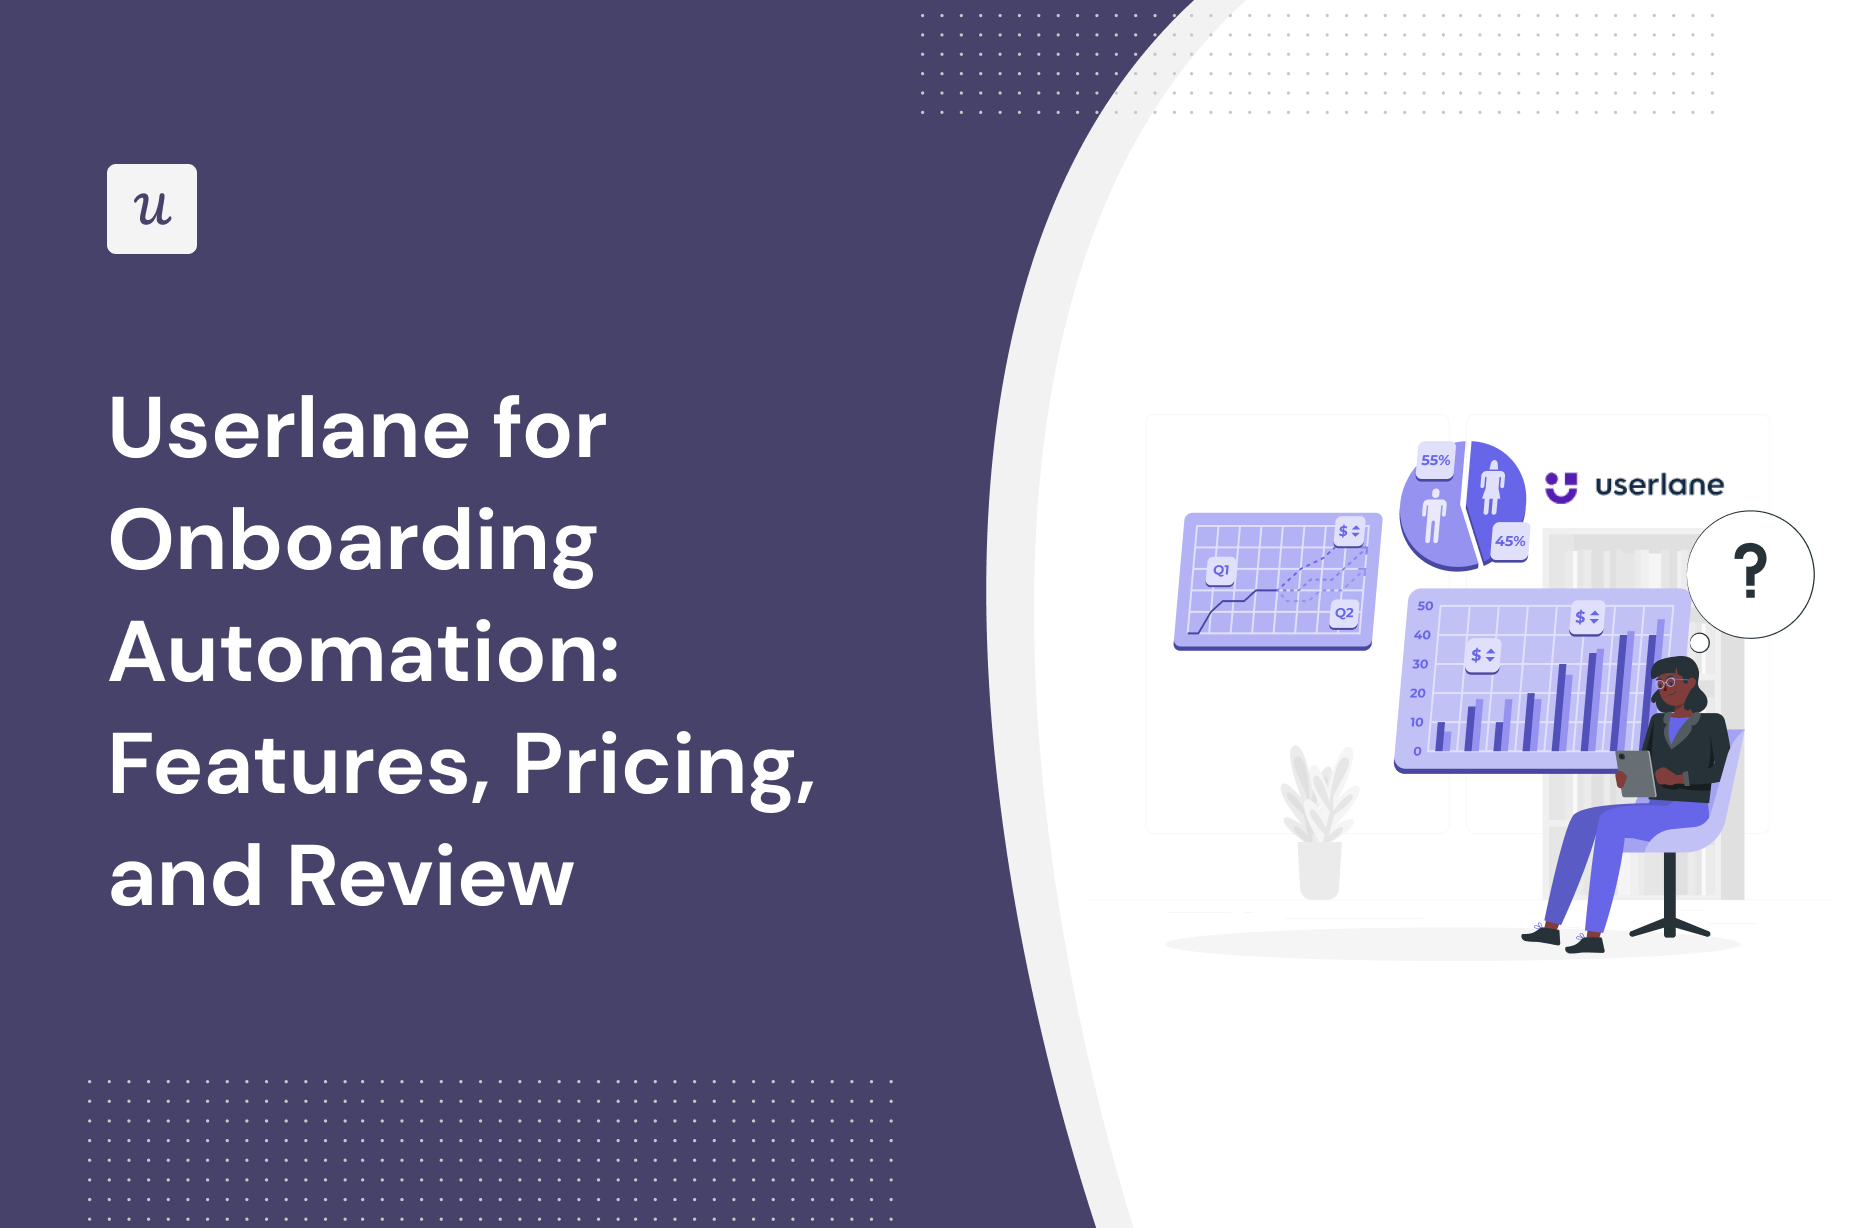 Userlane for Onboarding Automation: Features, Pricing, and Review